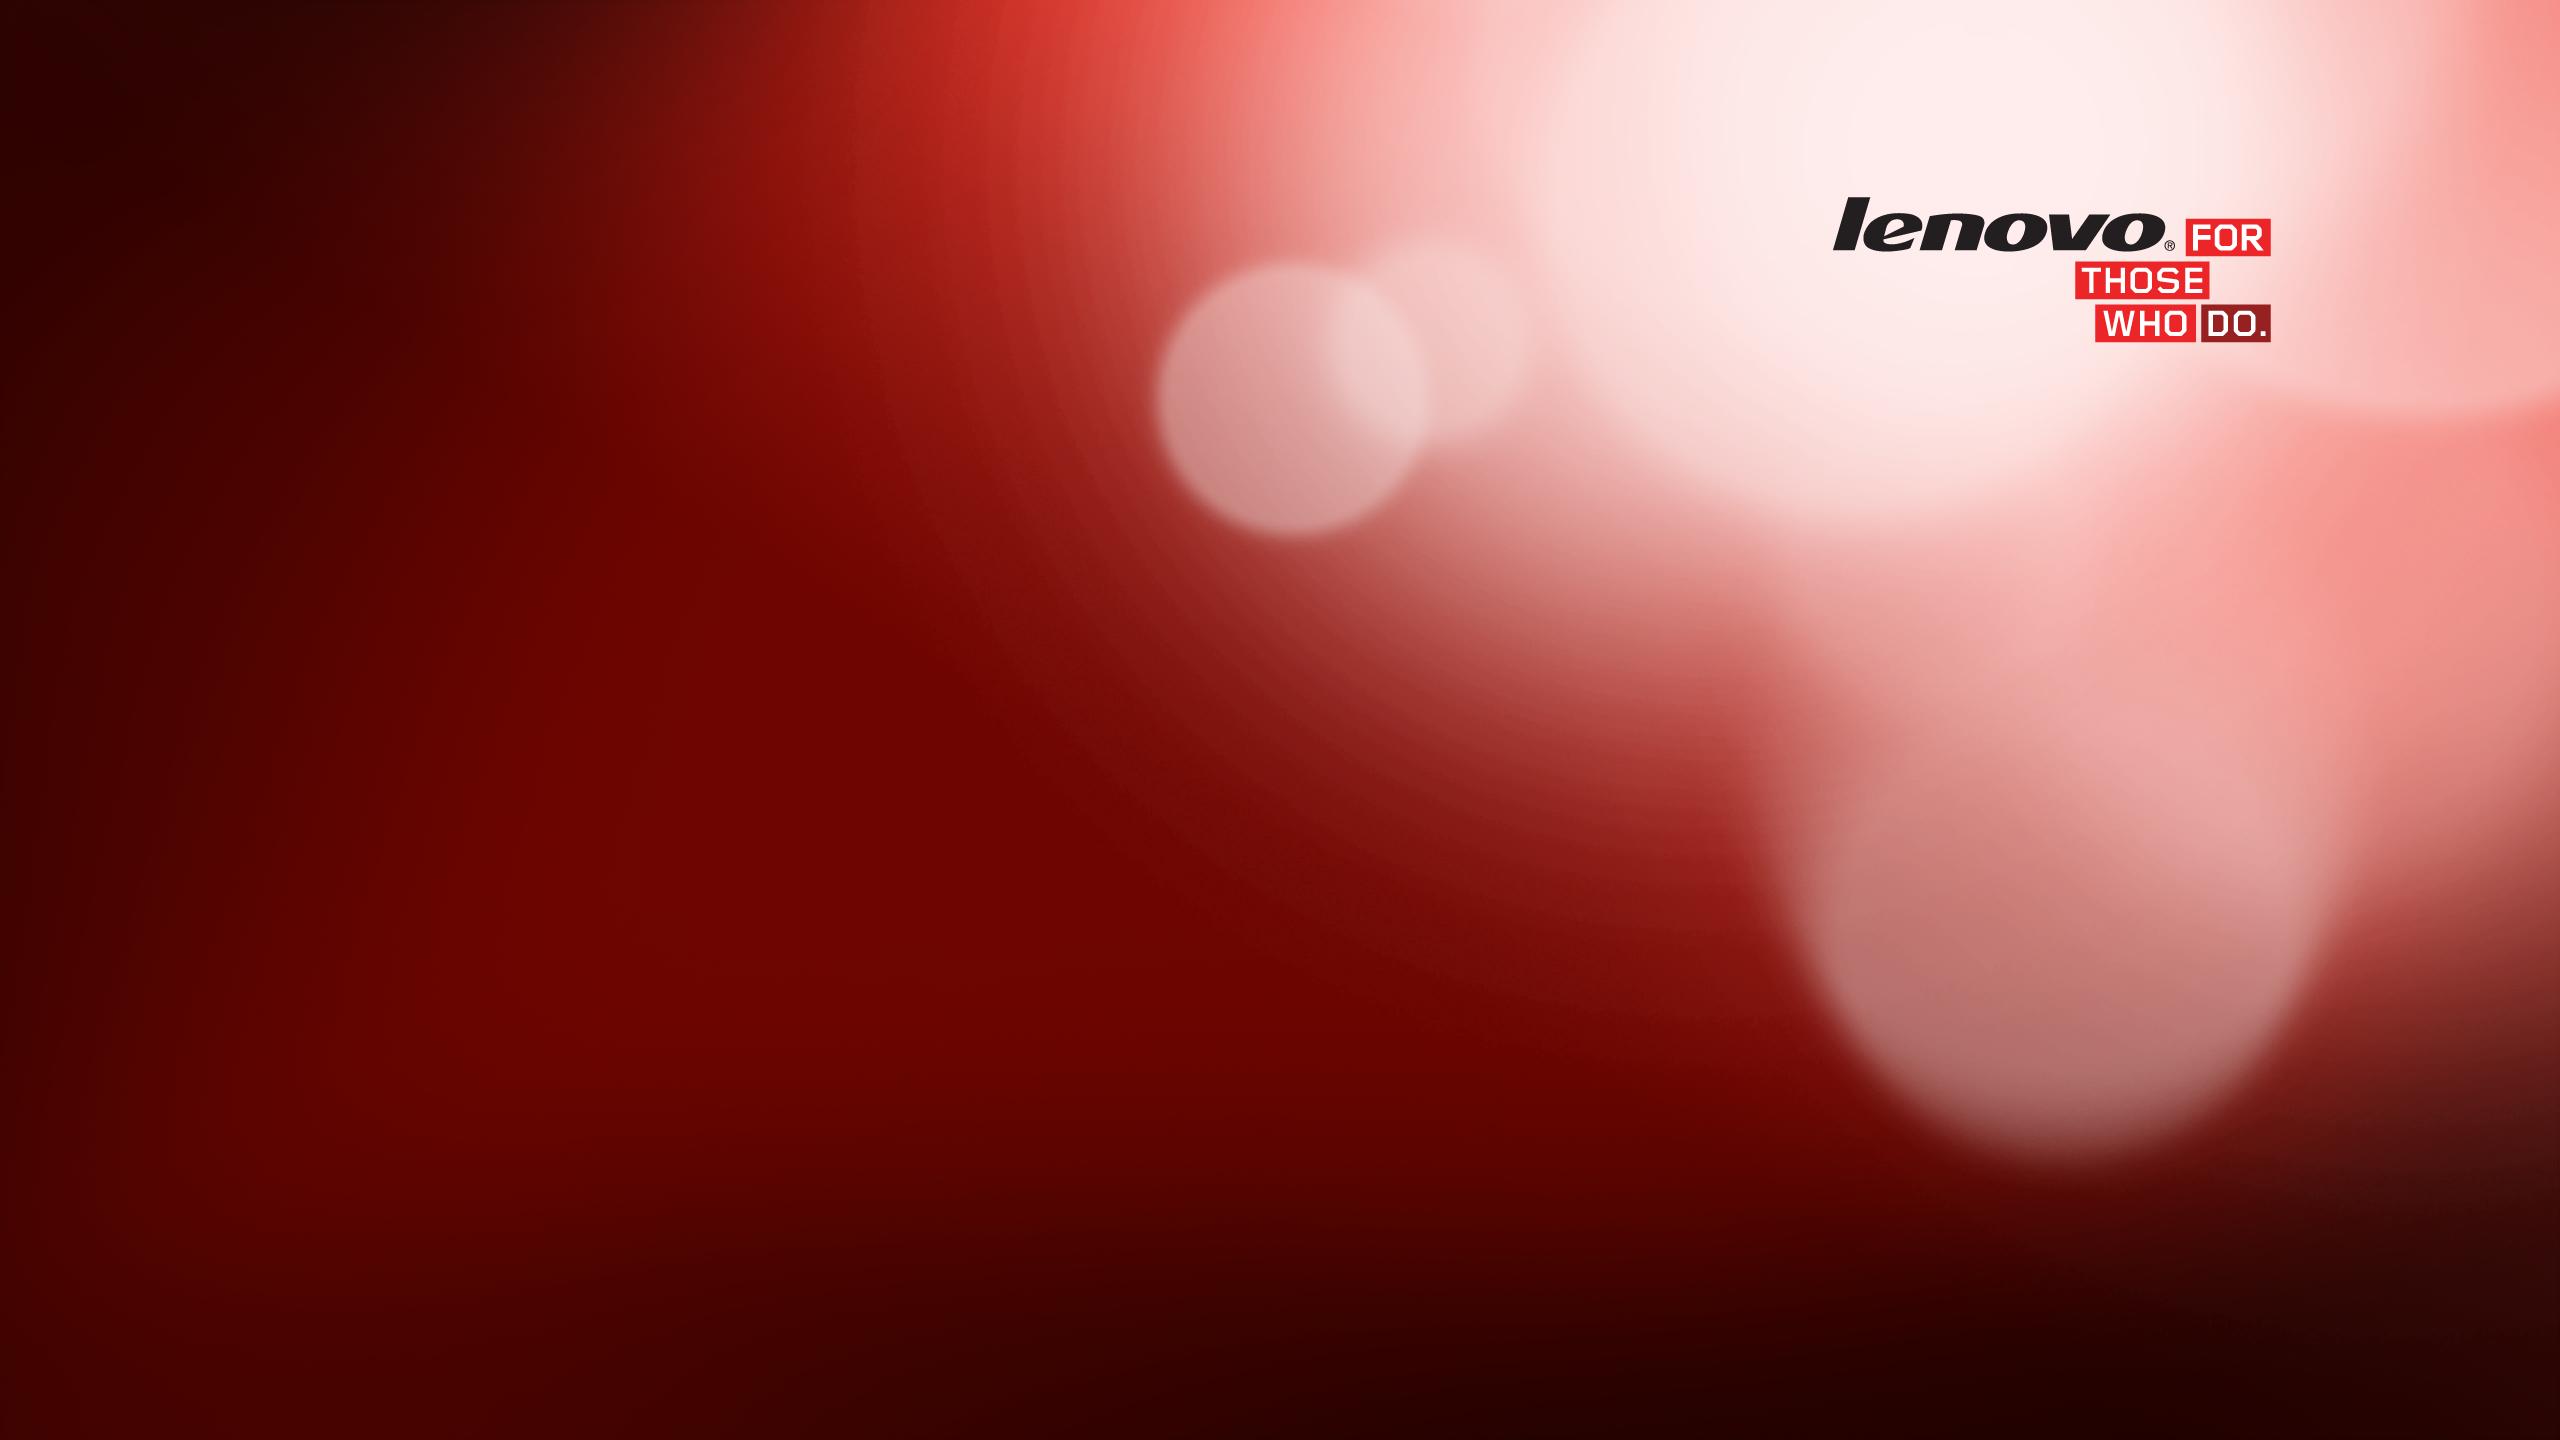 Lenovo Wallpapers, HD Lenovo Backgrounds, Free Images Download